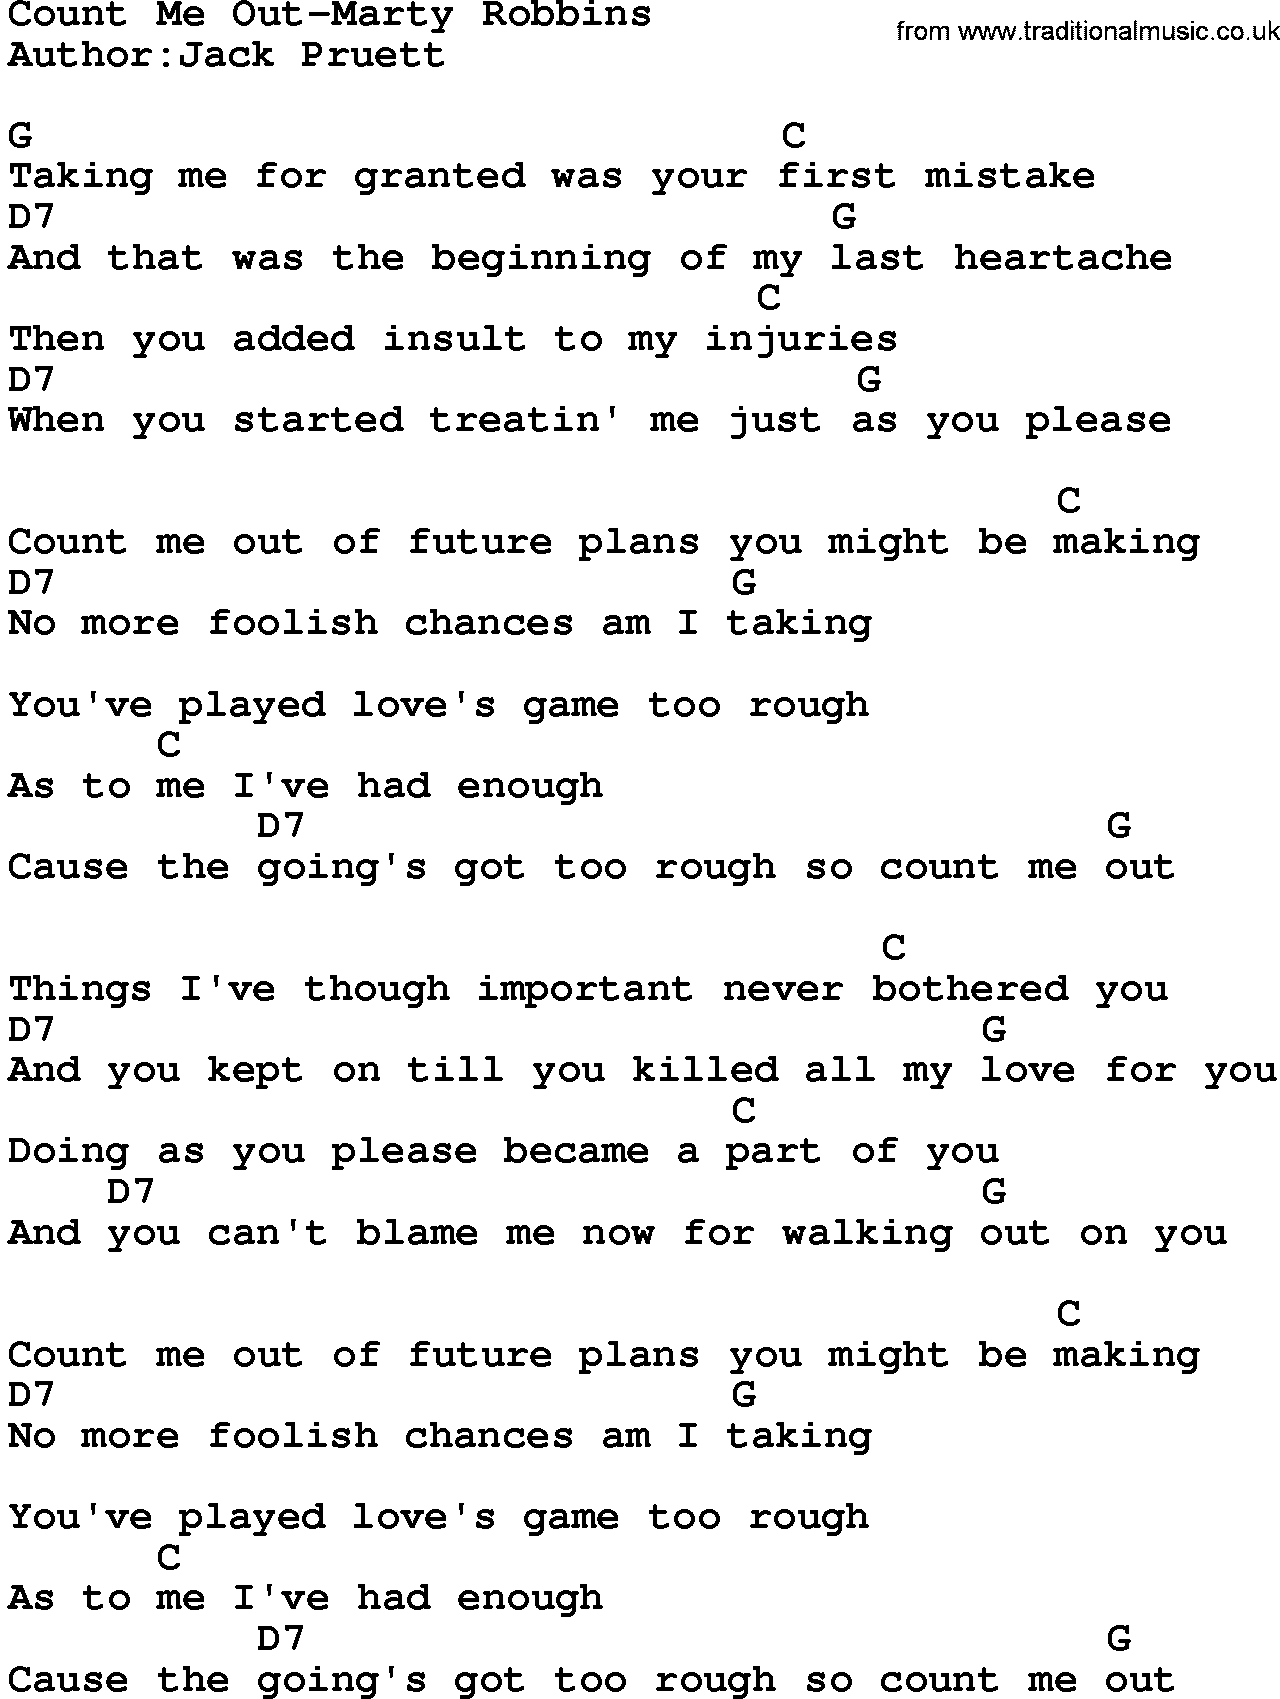 Count On Me Chords Country Musiccount Me Out Marty Robbins Lyrics And Chords